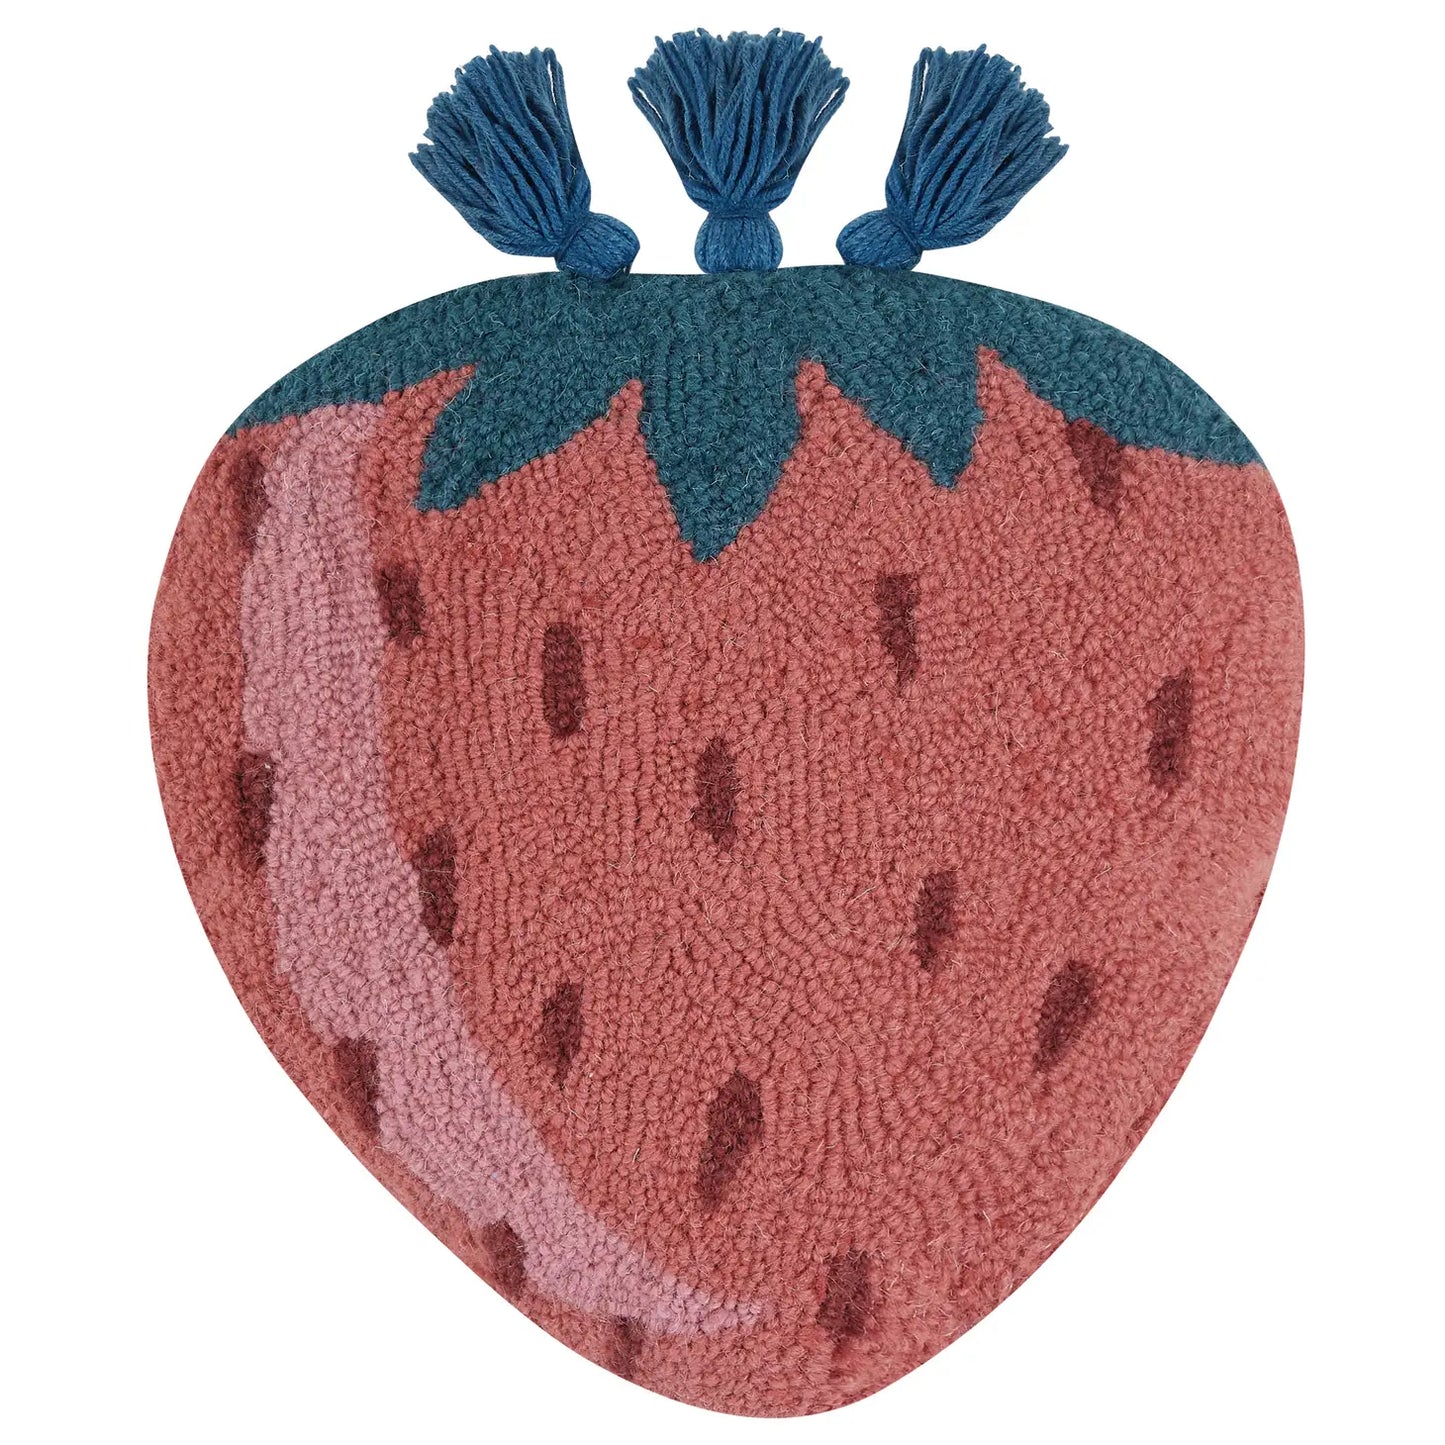 Strawberry Hooked Wool 14" x 14" Shaped Pillow